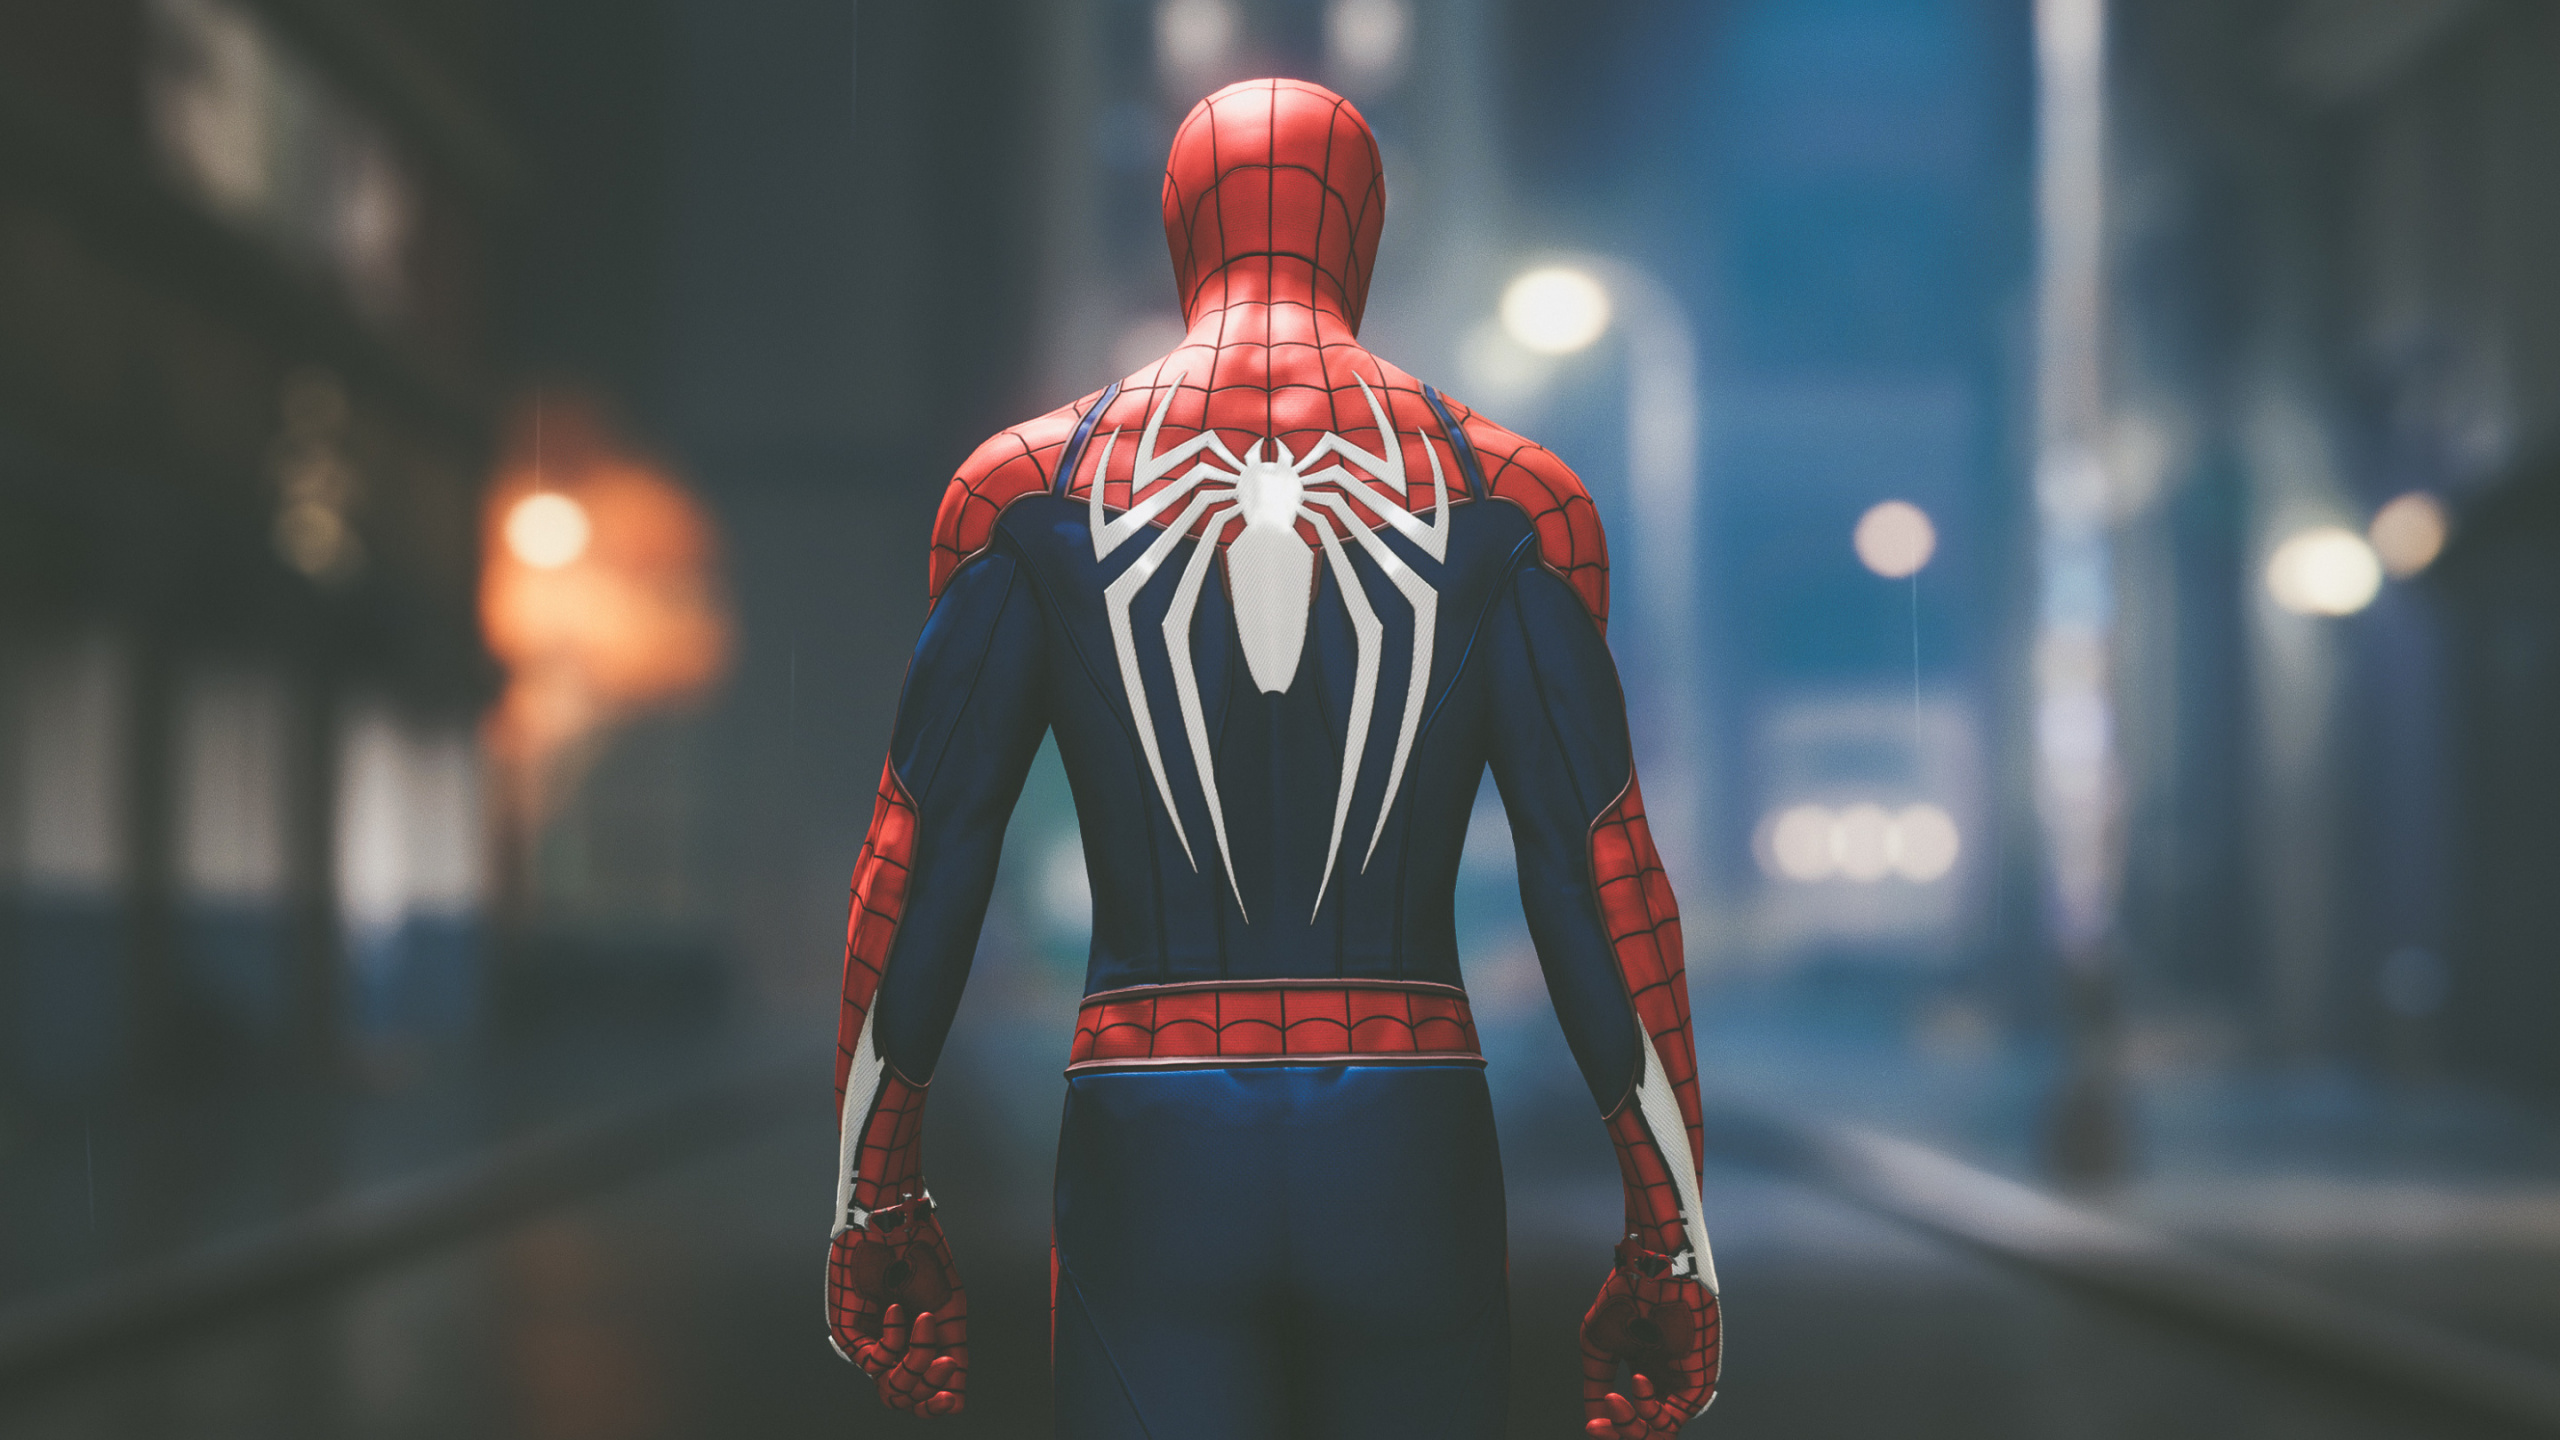 Spider-man, Superhero, Action Figure, Playstation 4, Fictional Character. Wallpaper in 2560x1440 Resolution